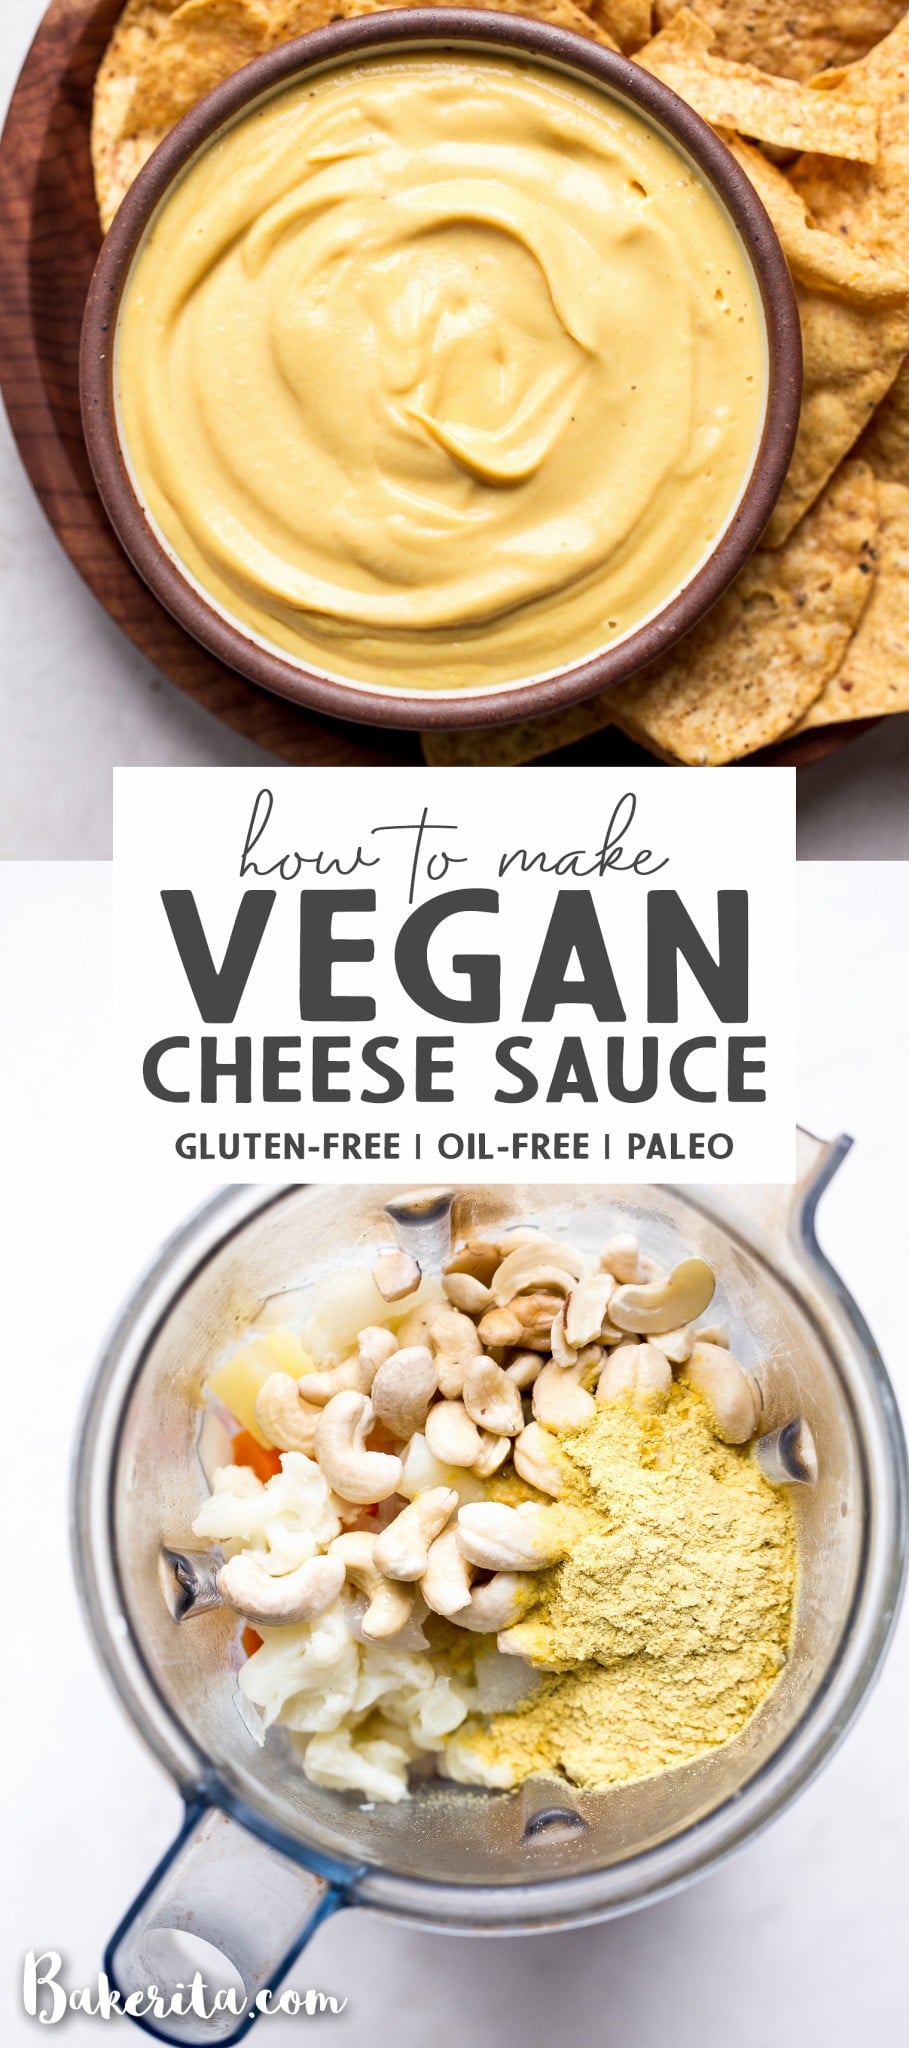 This Vegan Cheese Sauce recipe is easy to make and tastes good on just about everything! It's made with vegetables and cashews for an oil-free, dairy-free cheese sauce. You'll love it with pasta or vegetables, on nachos, and taco bowls, or used as a vegan cheese dip with chips or veggies.